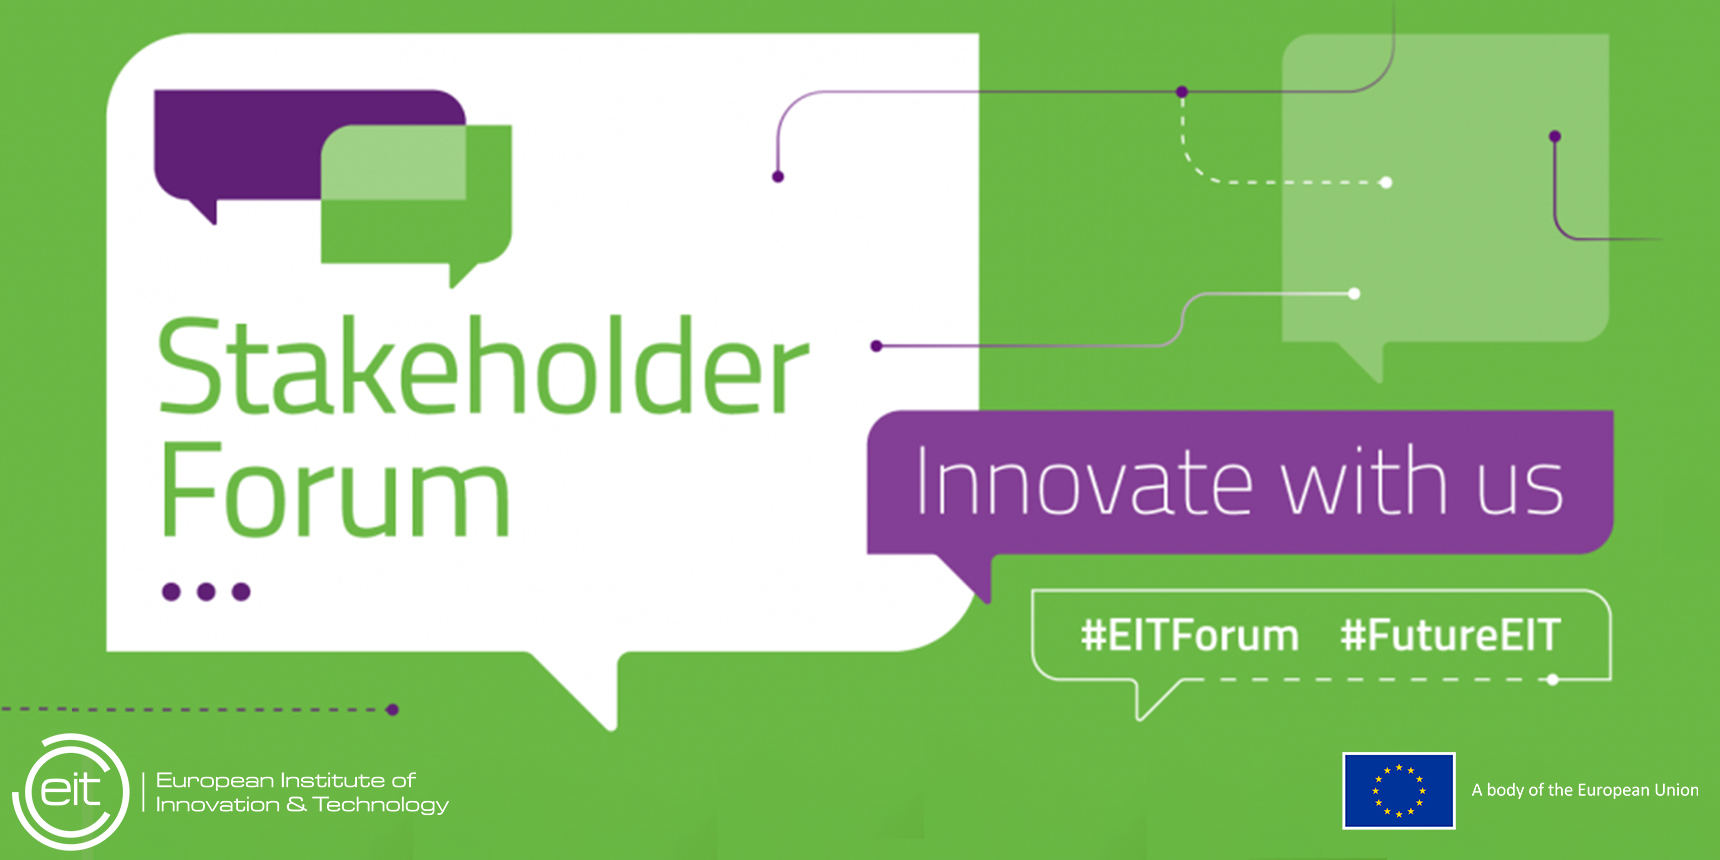 EIT Stakeholder Forum 2020 results published